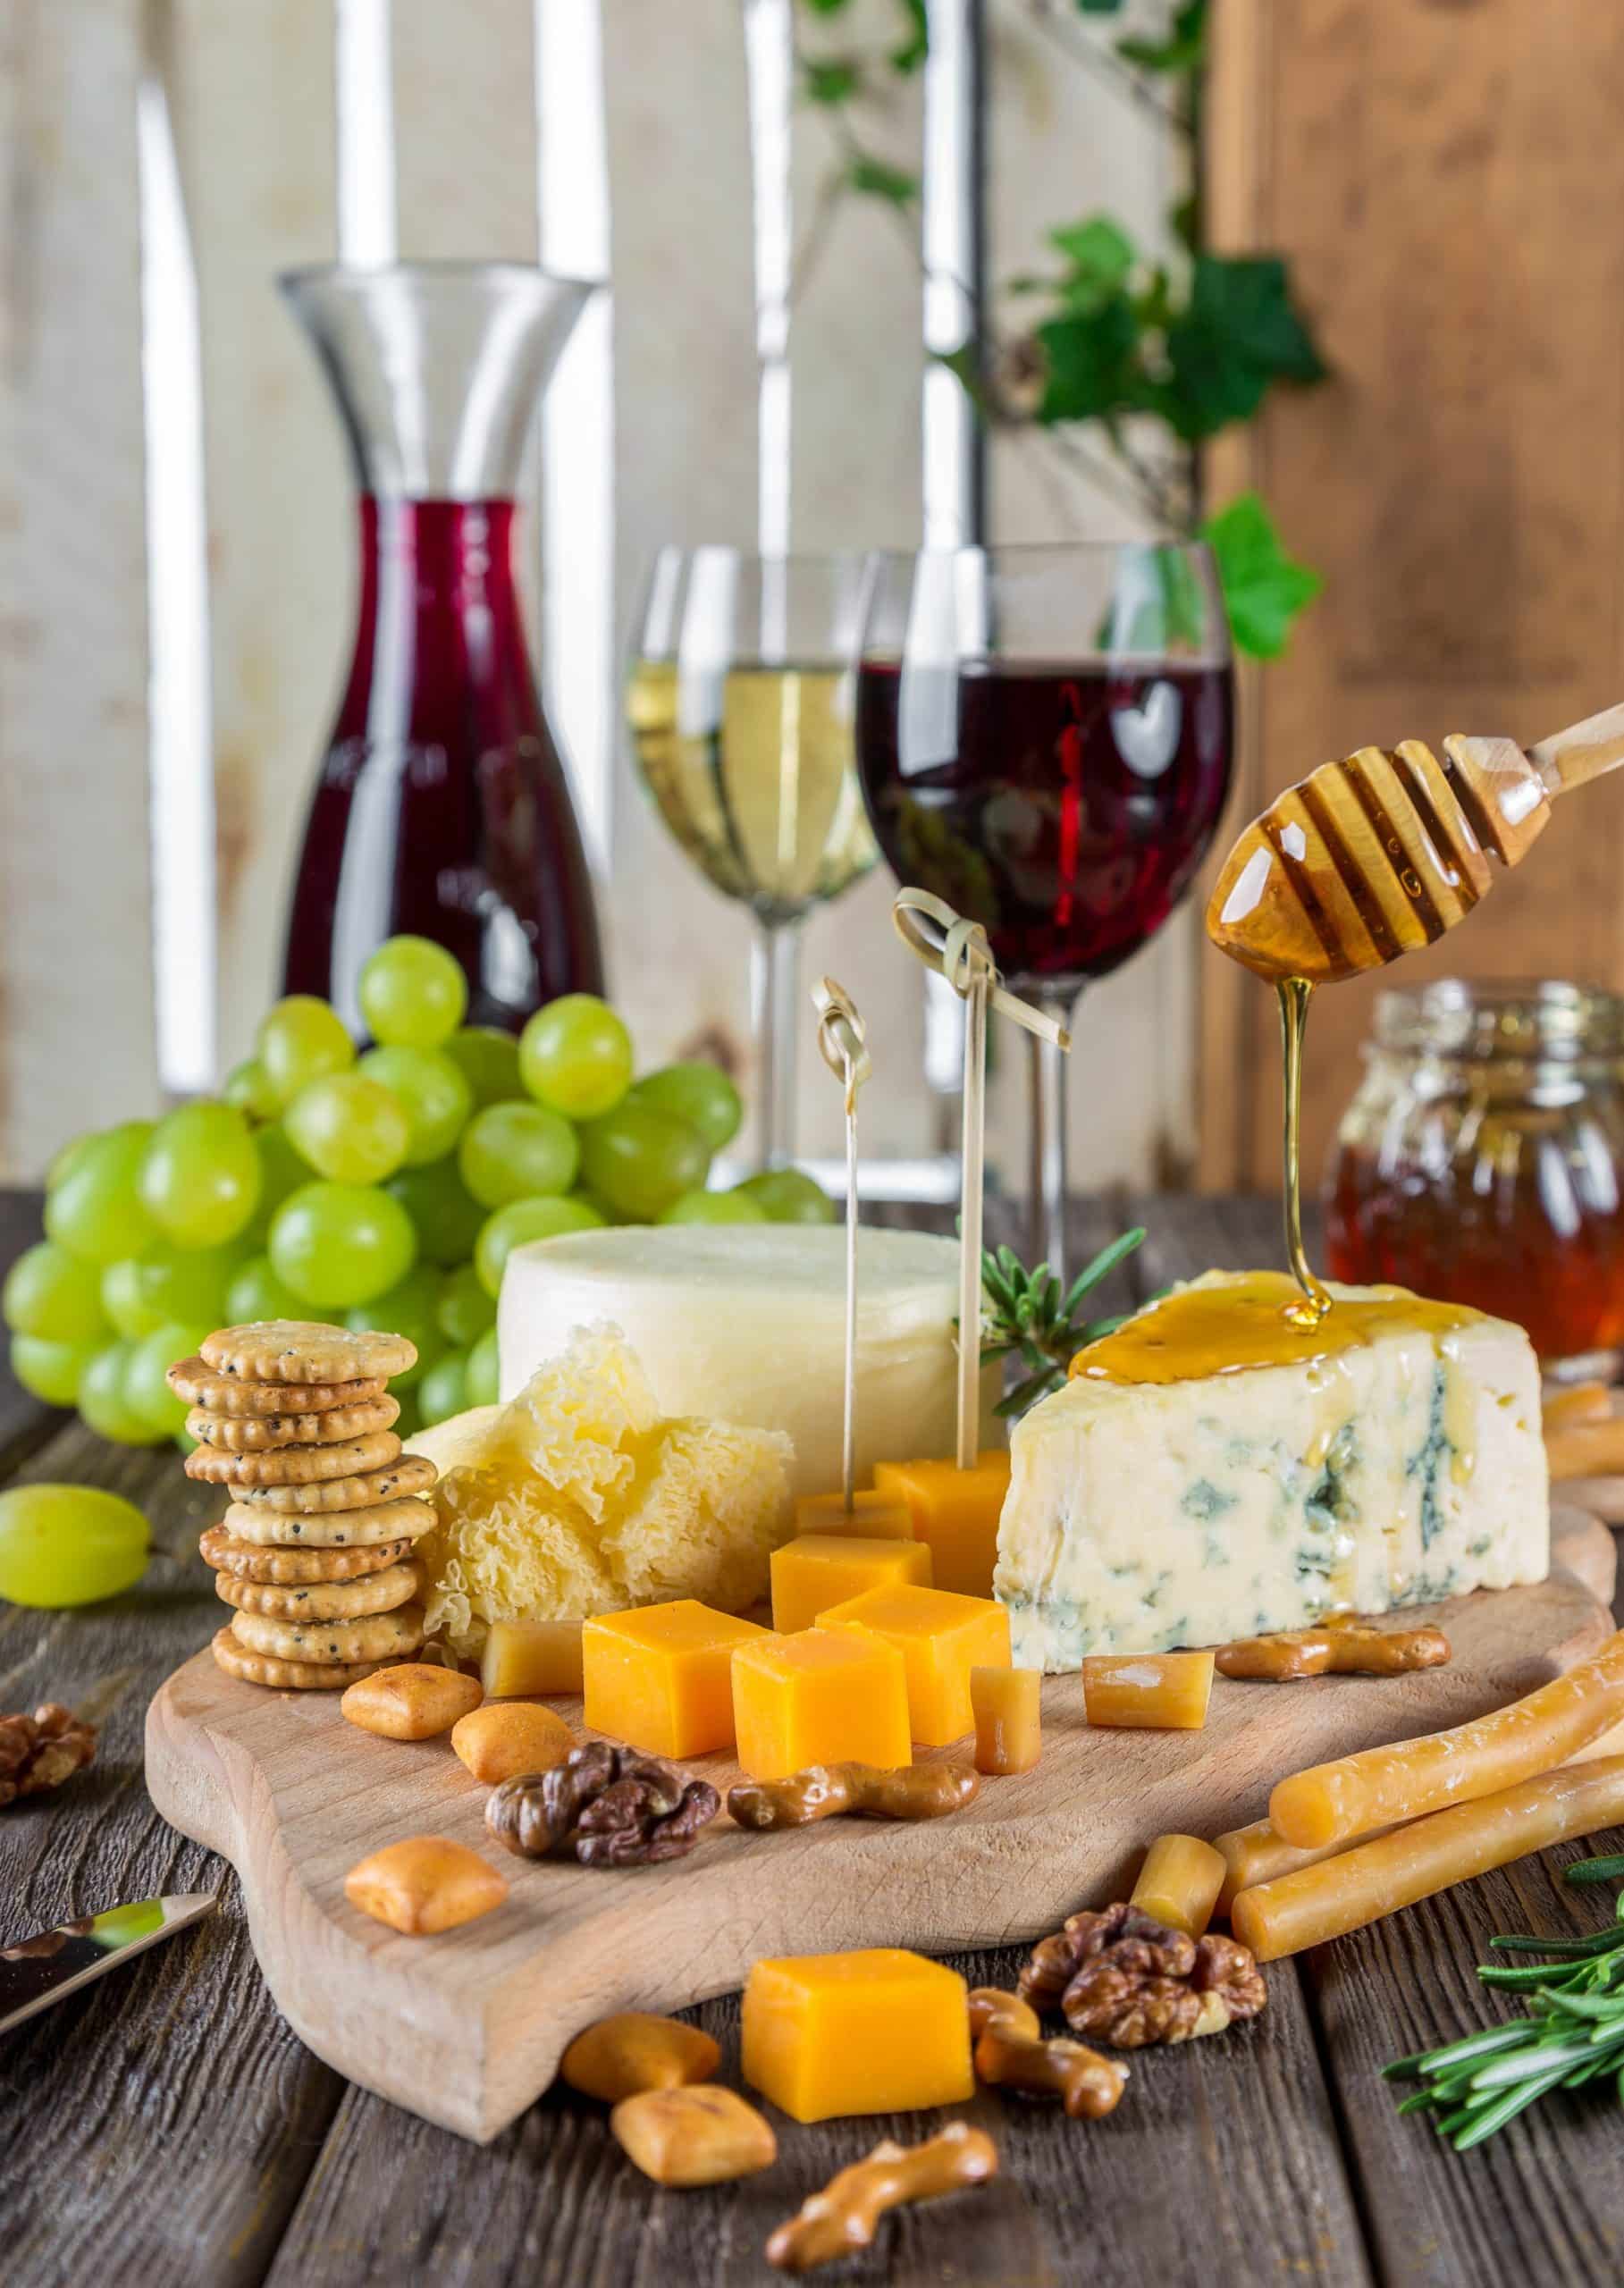 A selection of cheeses, crackers, grapes and honey on a cutting board. Glasses of red and white wine are in the background